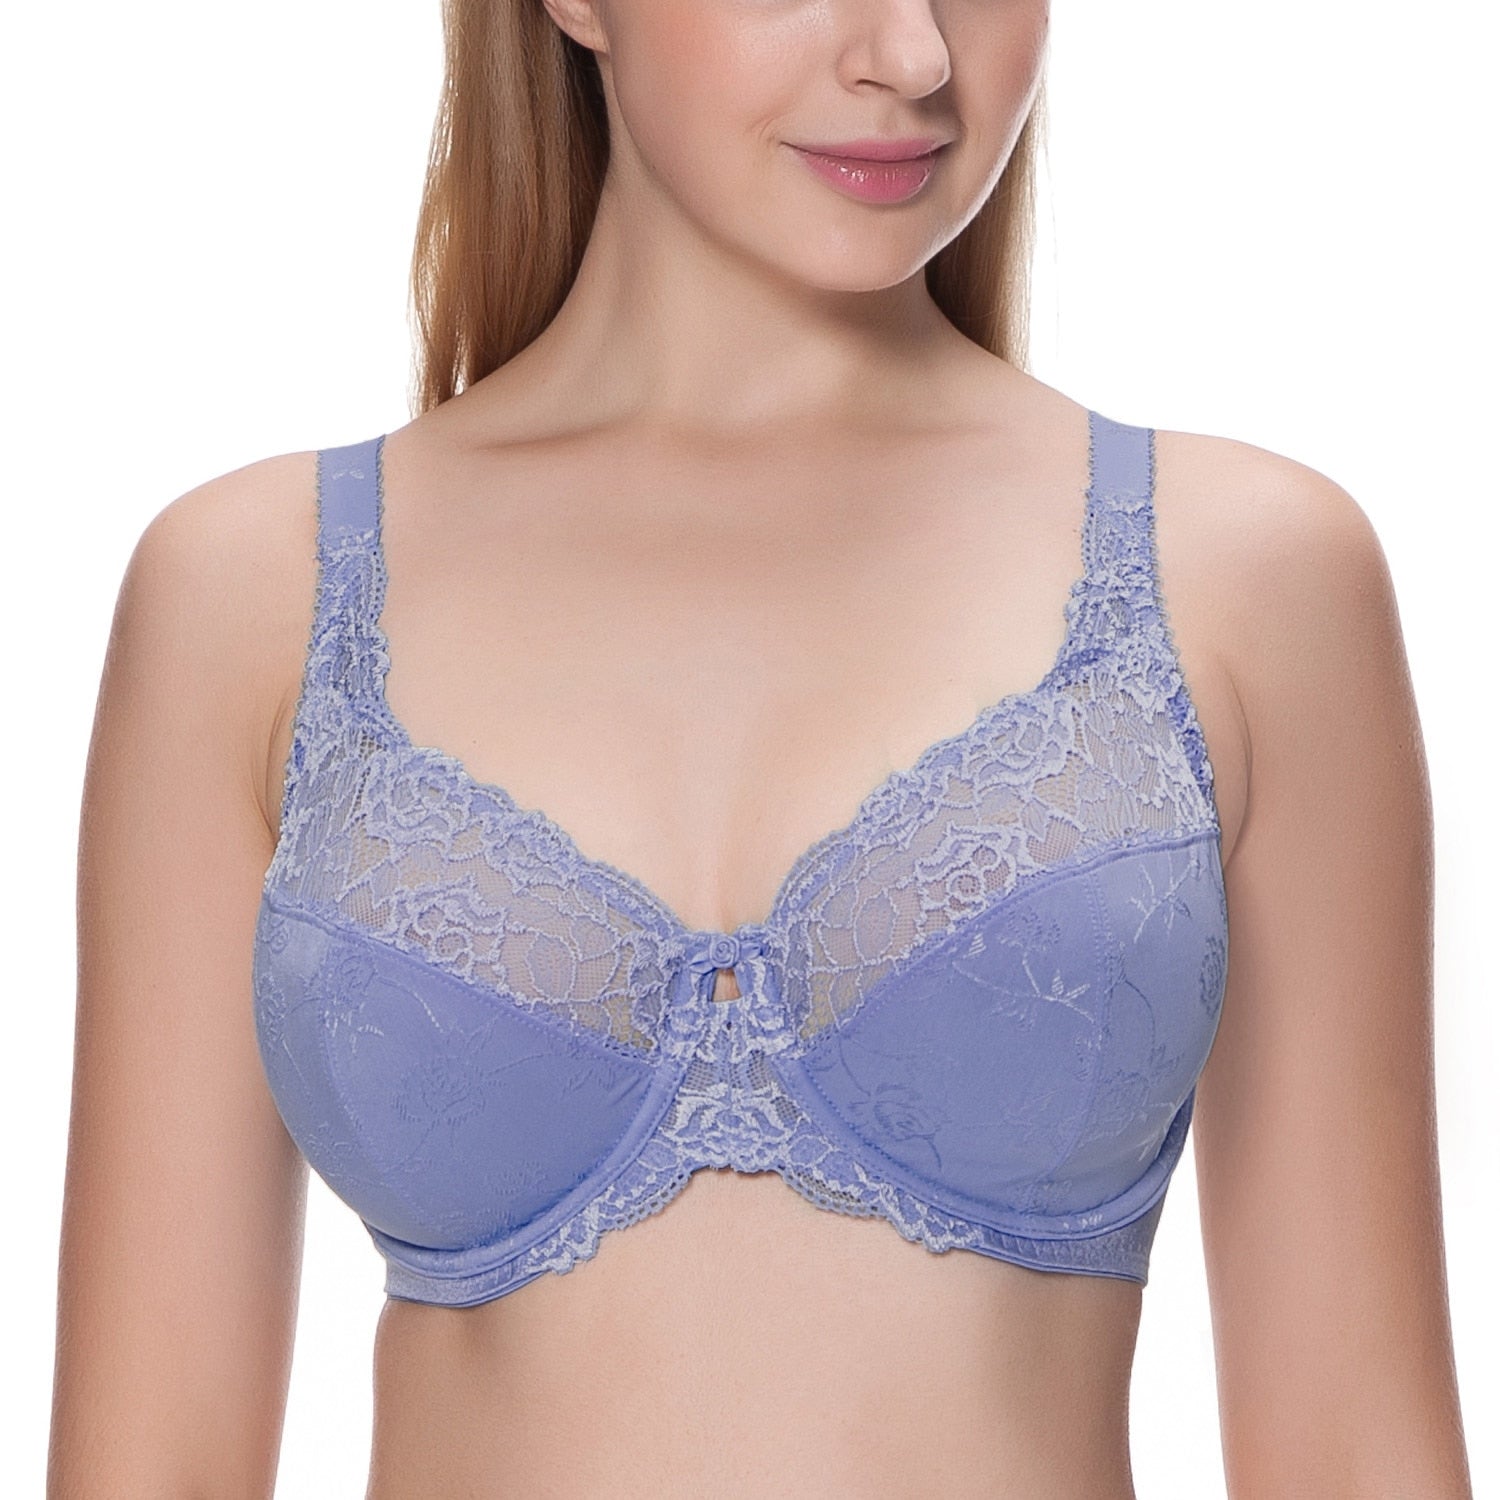 SS Online Trading - SSHK Shop - Plus size underwired non-padded lace bras